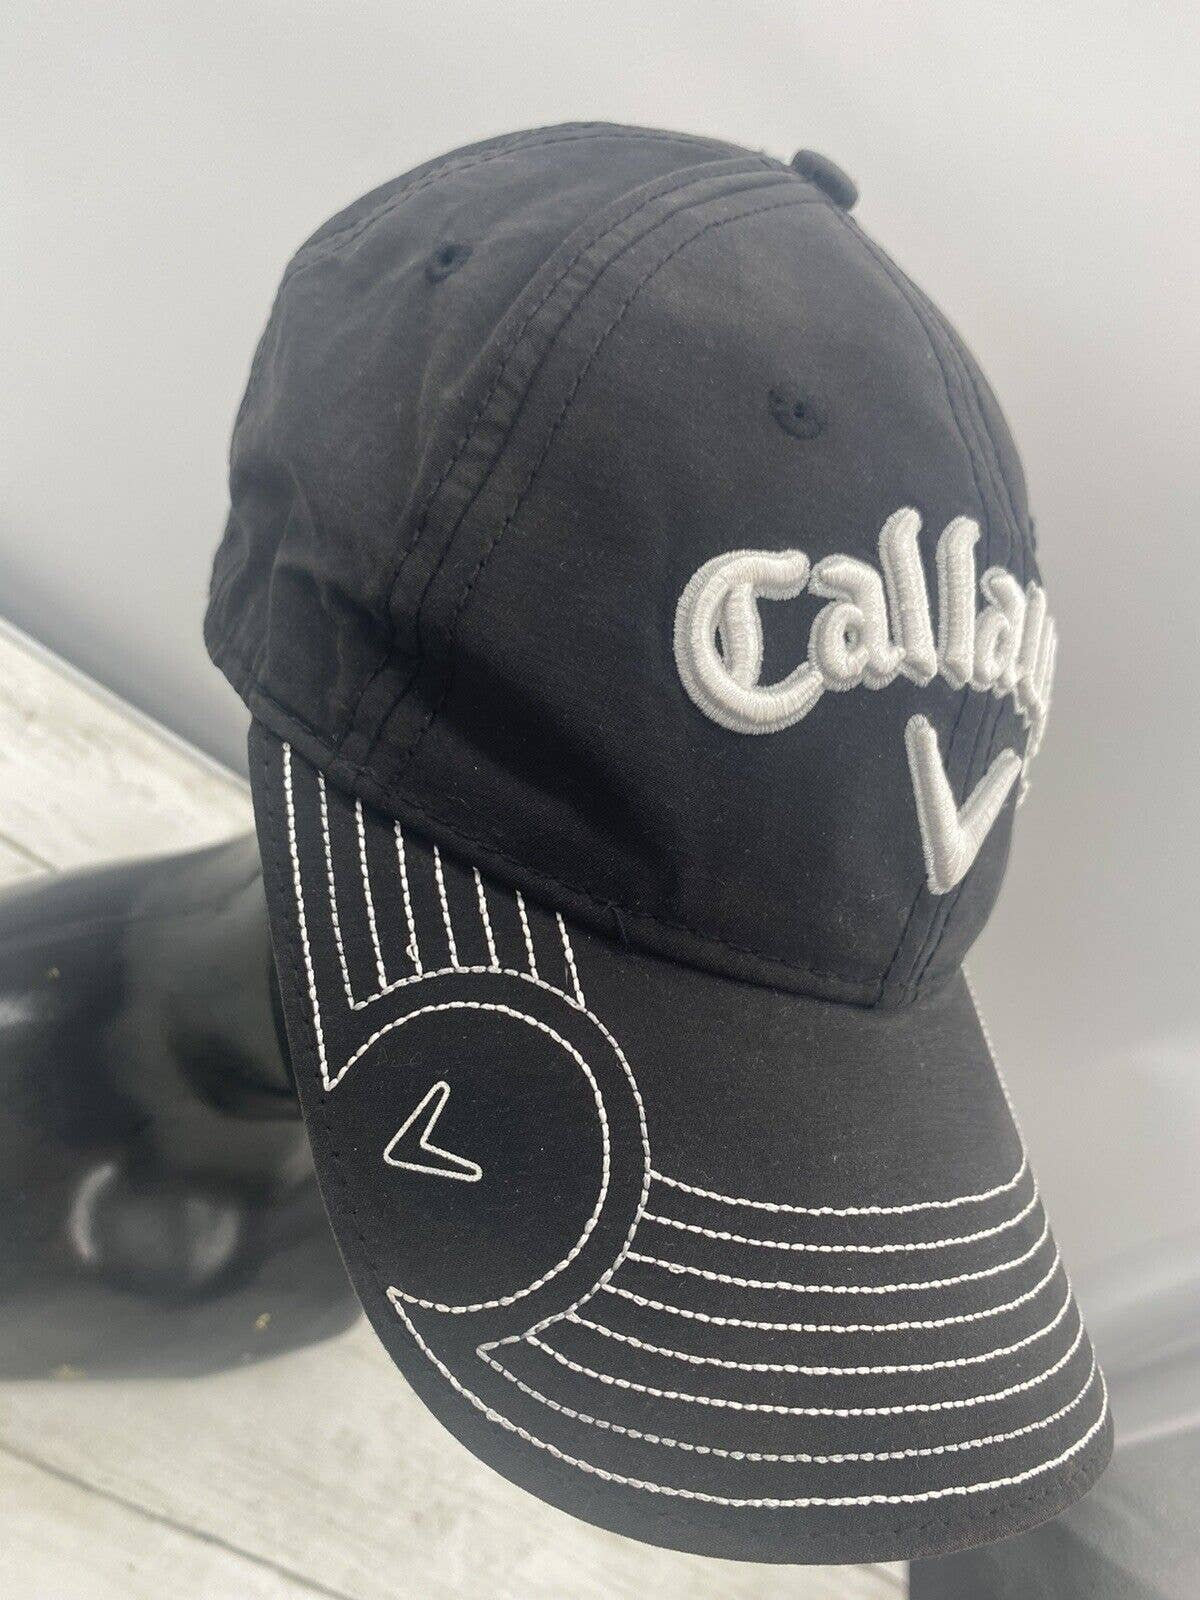 Callaway Golf Hat Cap Embroidered Black White One Size Fits All Pga Golf Hat  